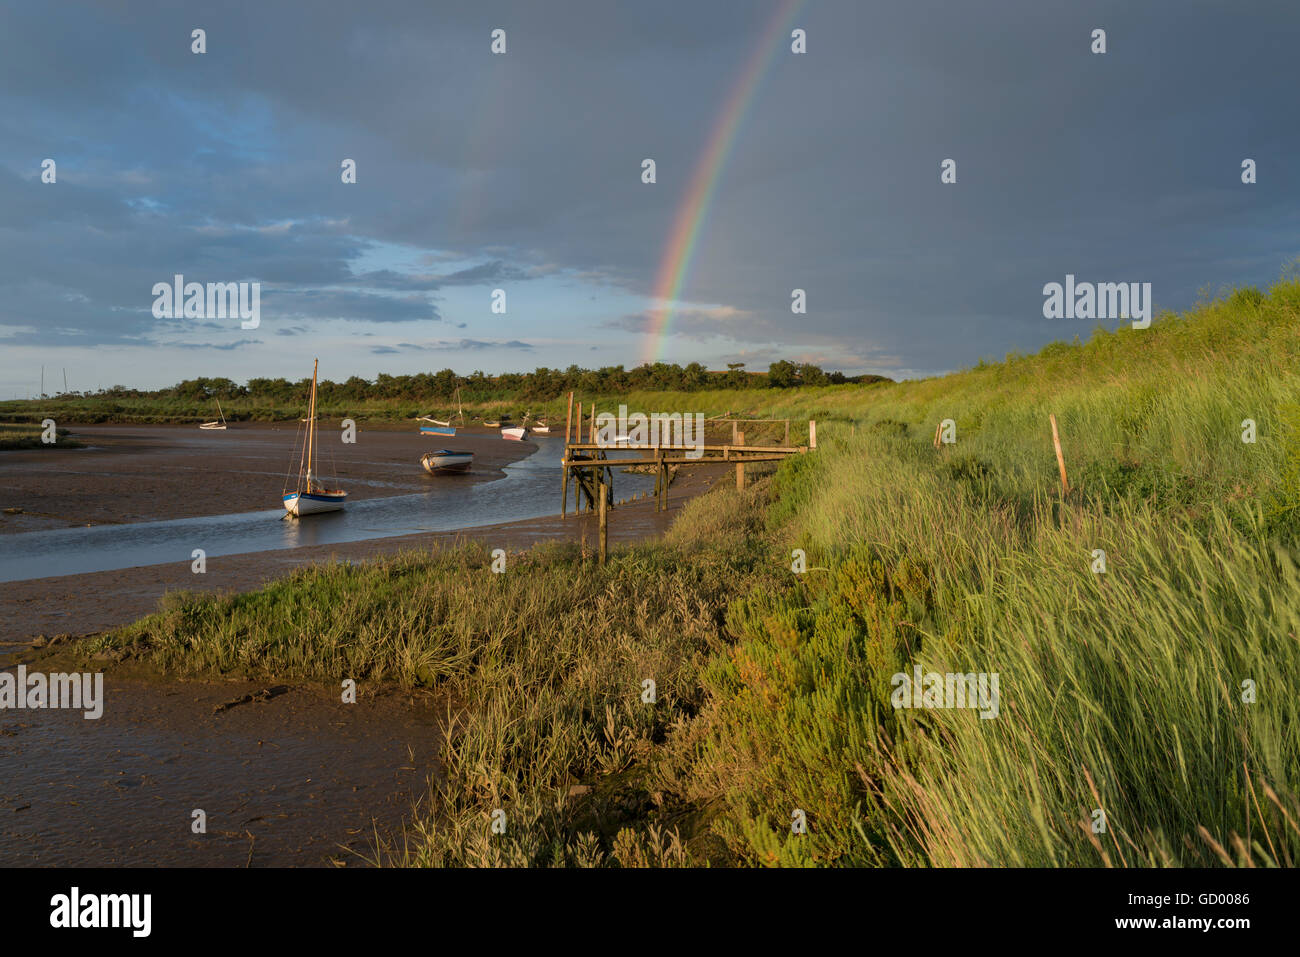 Evening light at low tide at Stiffkey Freshes in North Norfolk, England. Stock Photo